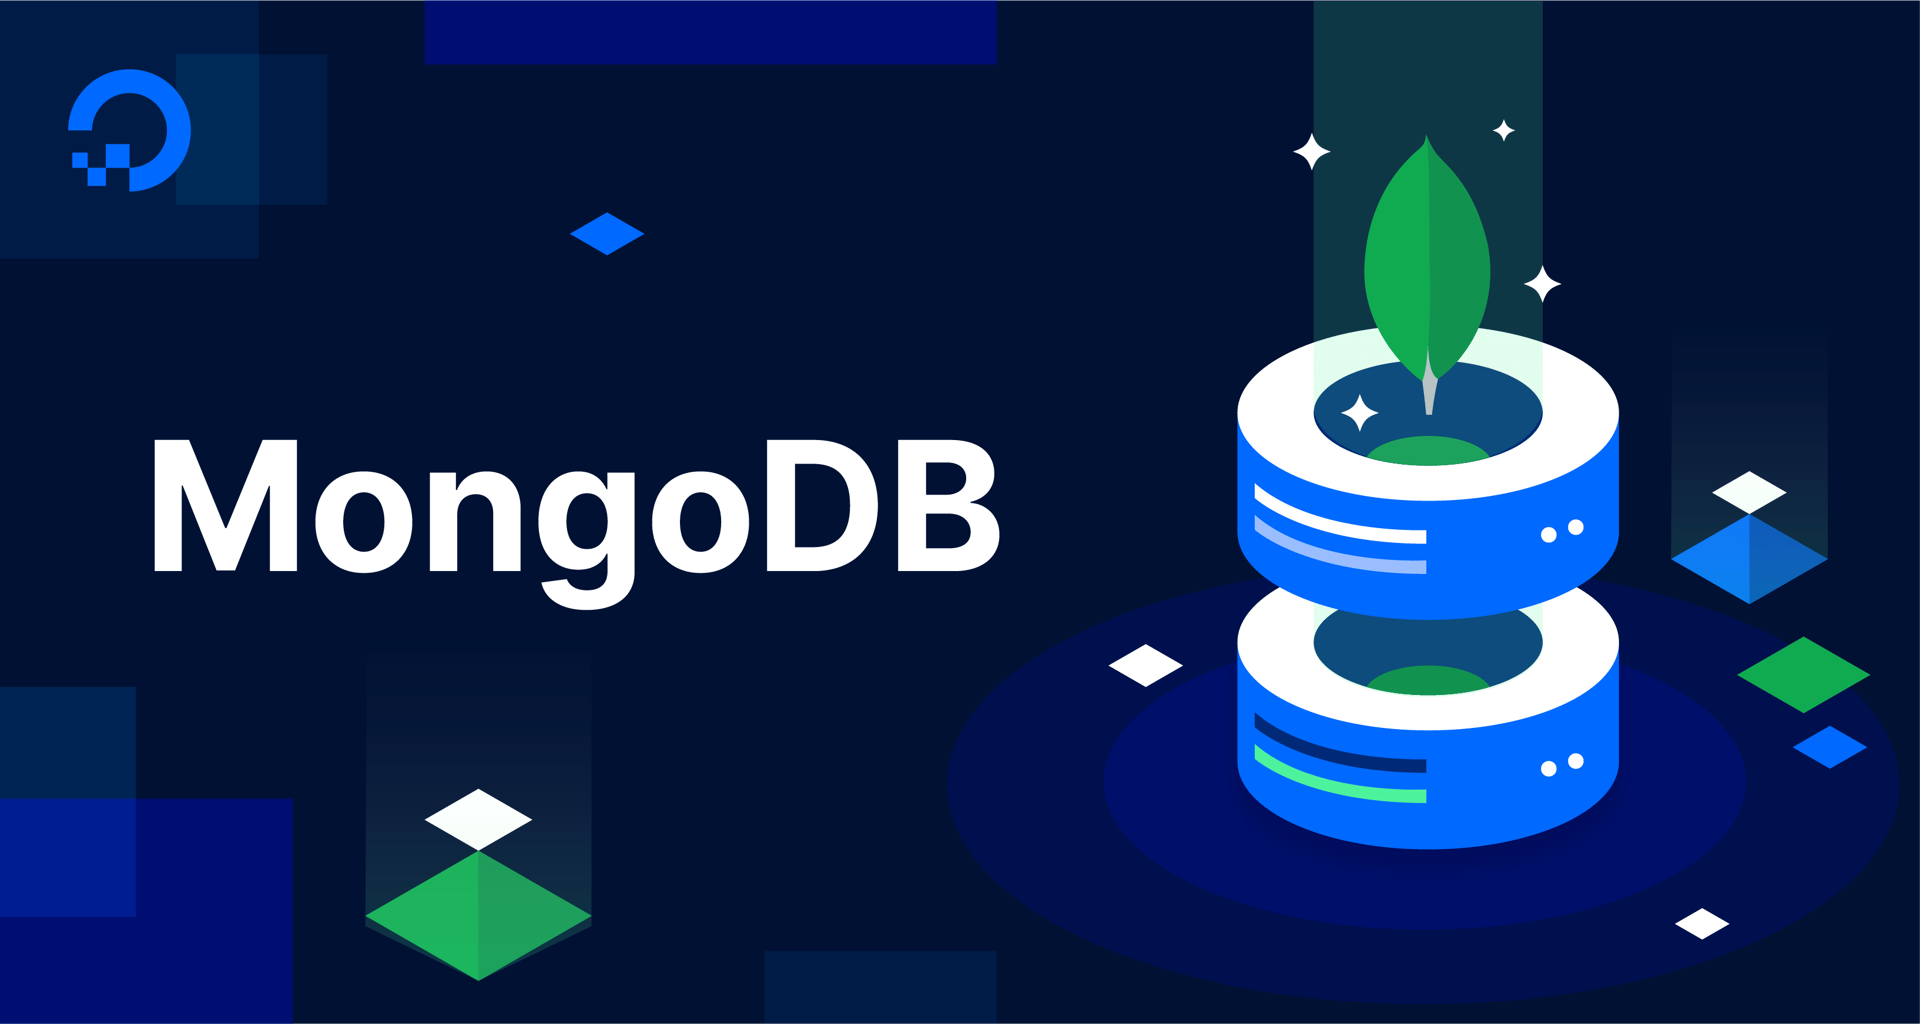 How To Design a Document Schema in MongoDB